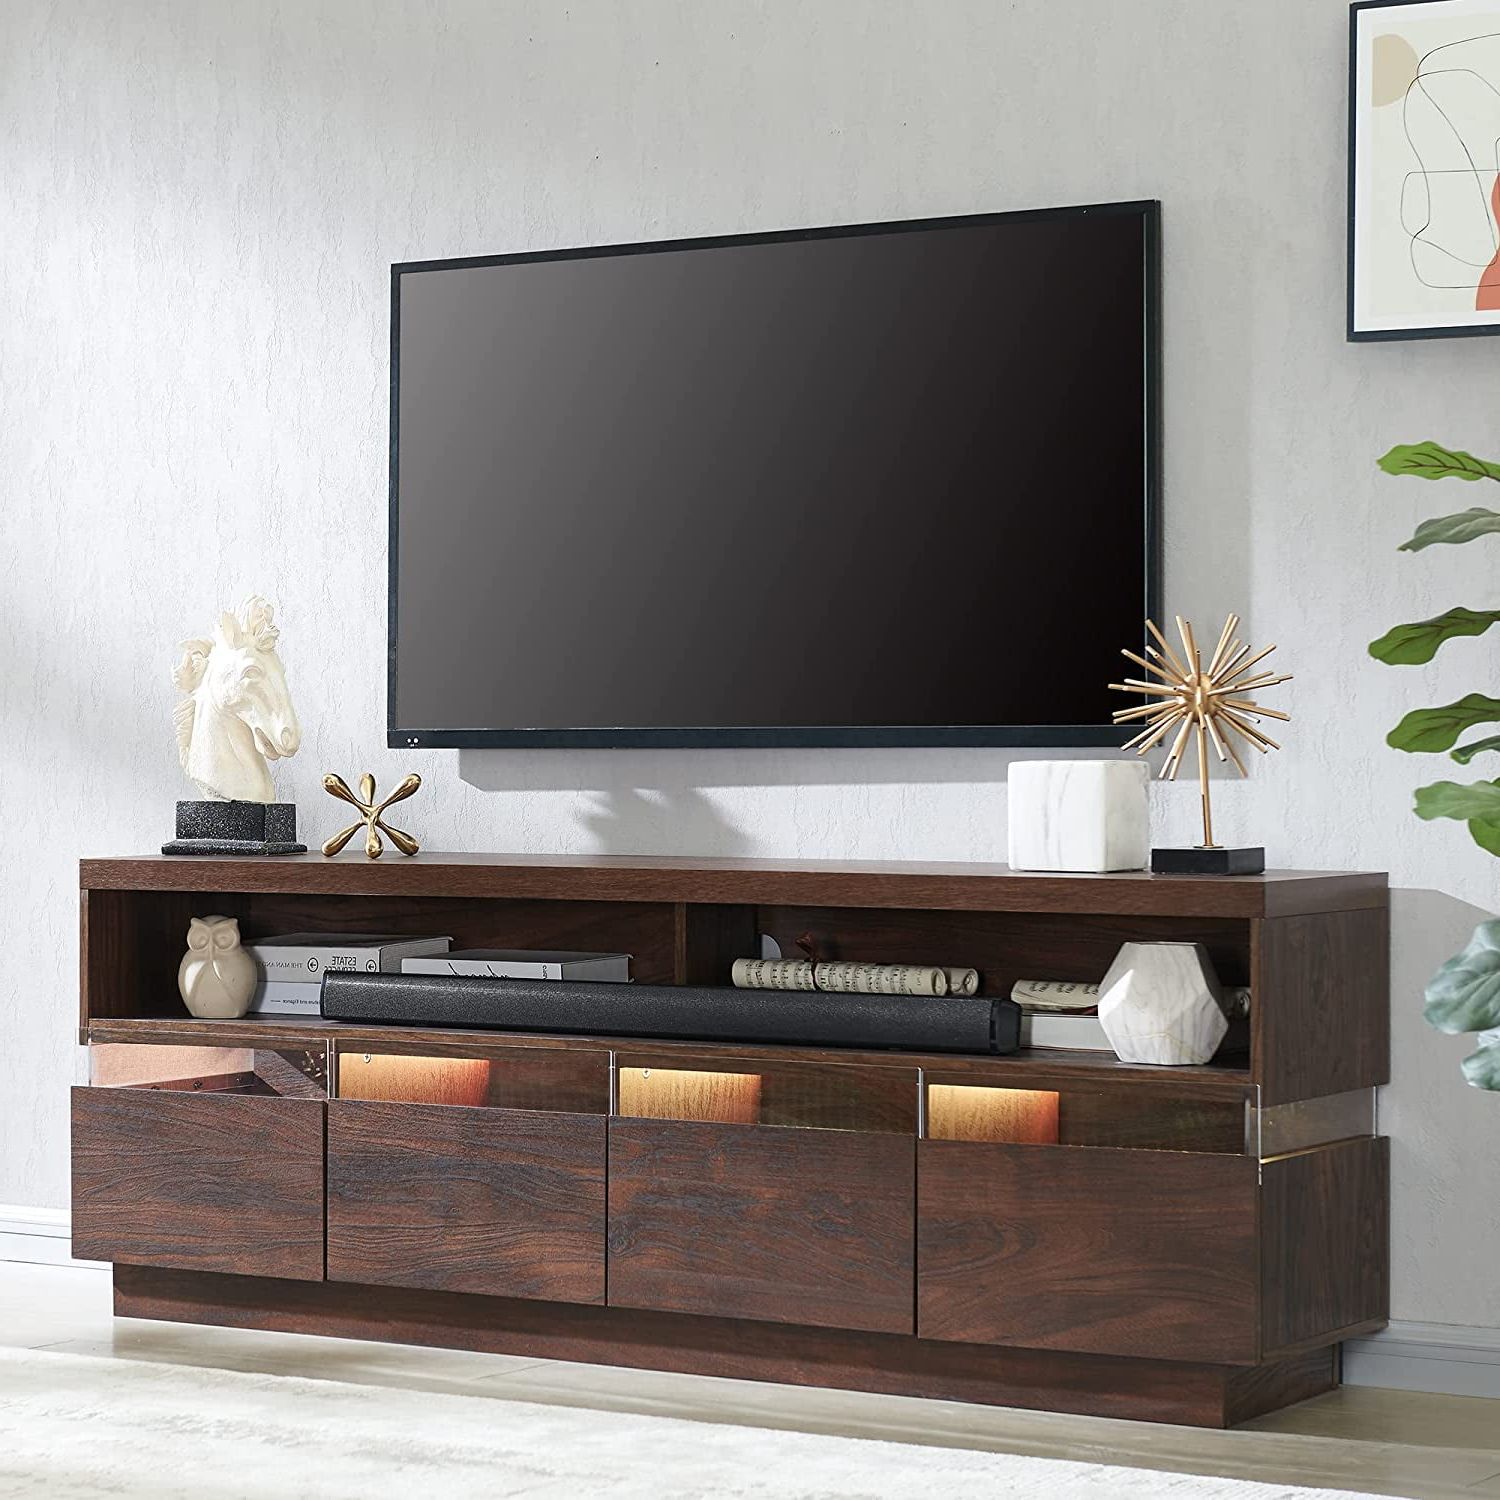 Okd Modern Wood Tv Stand For Tvs Up To 75" For Living Room With Led Lights Entertainment  Center,walnut – Walmart With Regard To Walnut Entertainment Centers (Gallery 11 of 20)